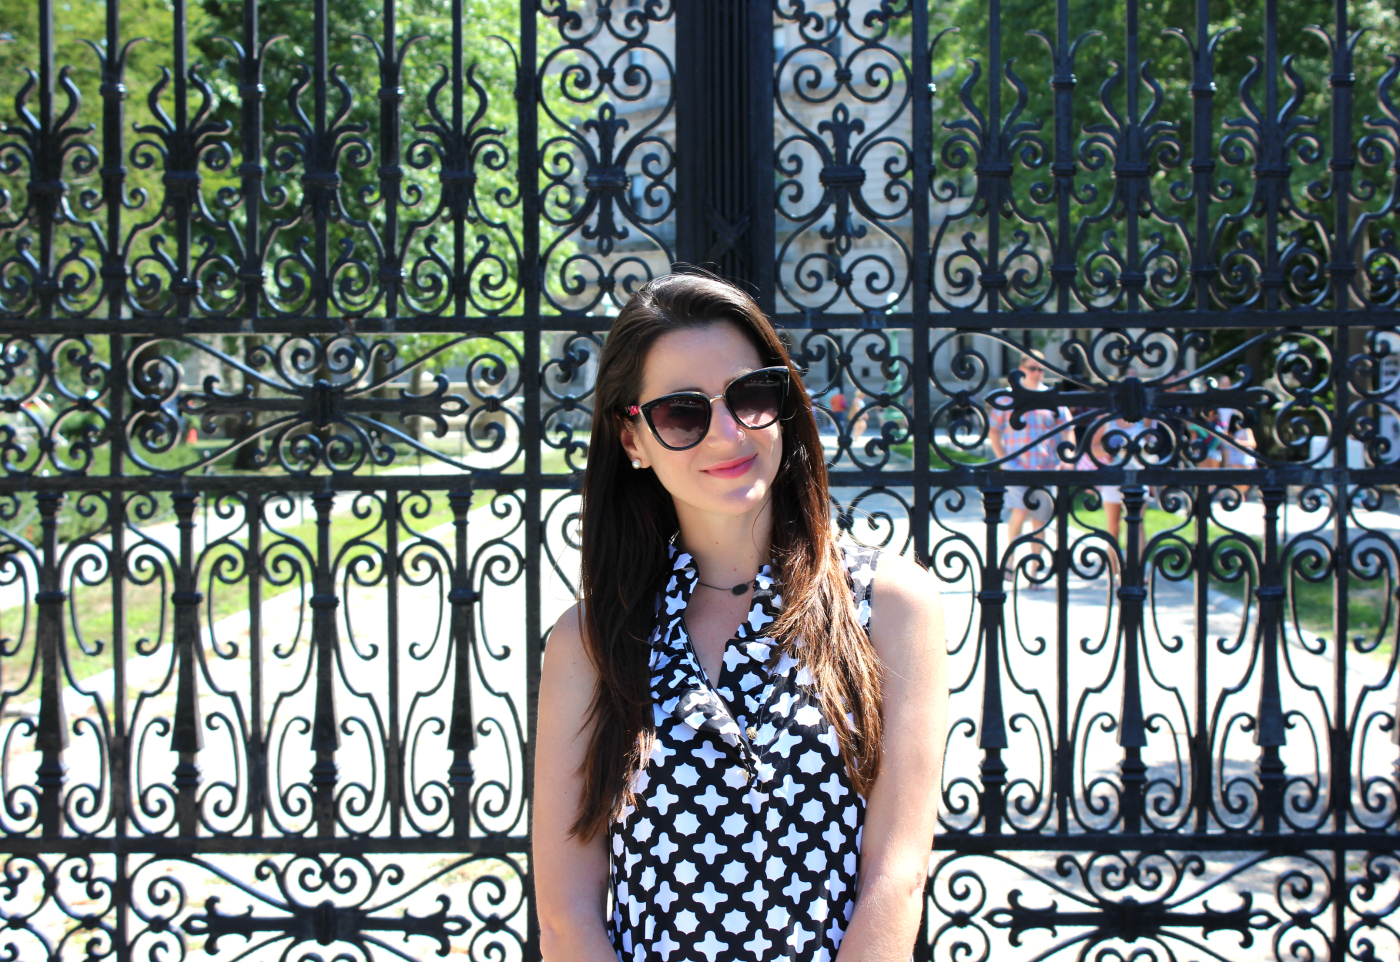 Brit Rose black and white ruffle dress for touring The Breakers in Newport, Rhode Island